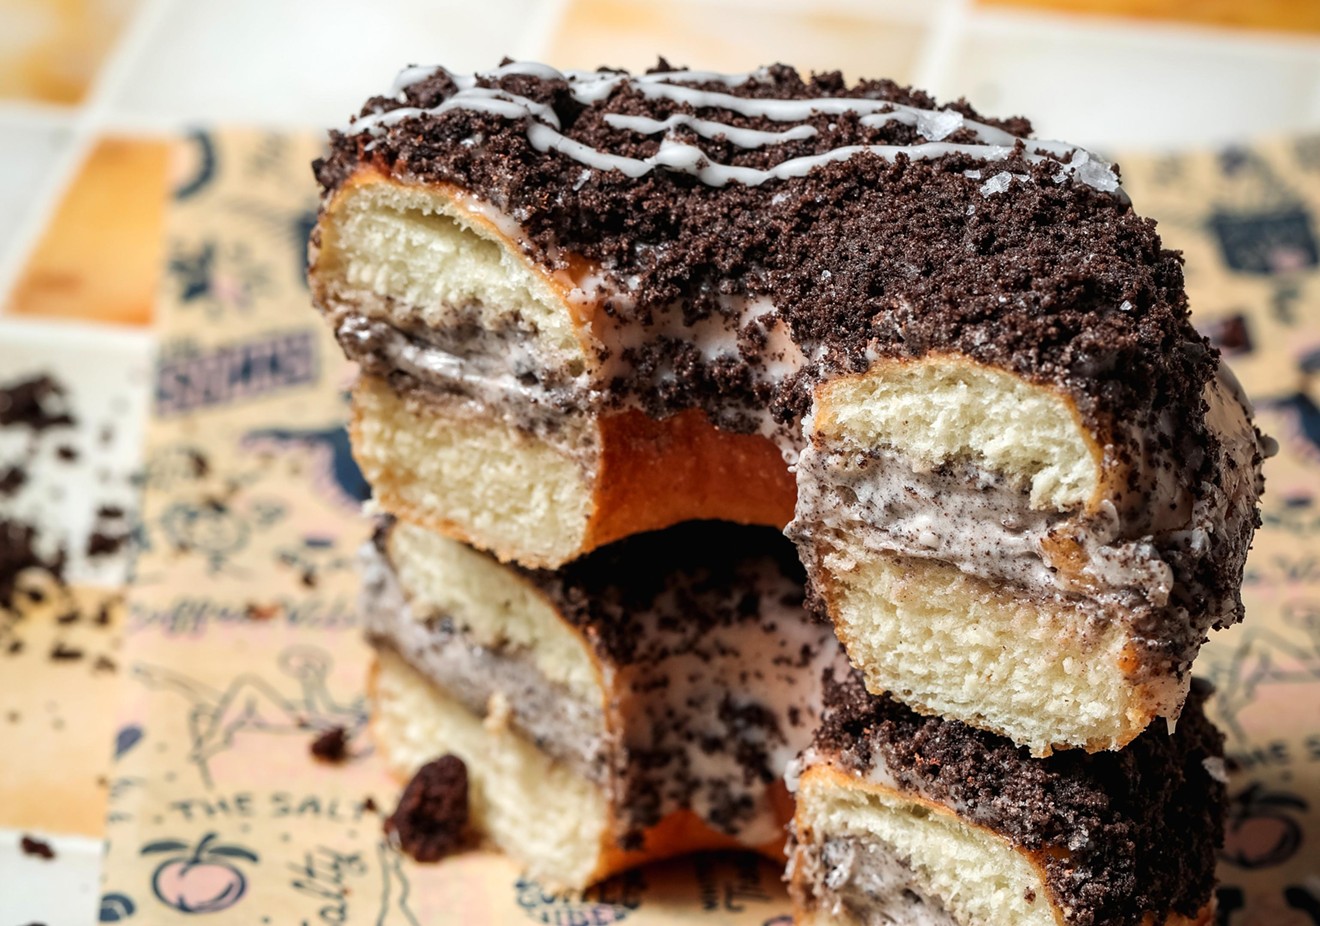 The Salty has opened a Coconut Grove location. Featured here is the "Vegan Ultimate Oreo Cookie" doughnut.